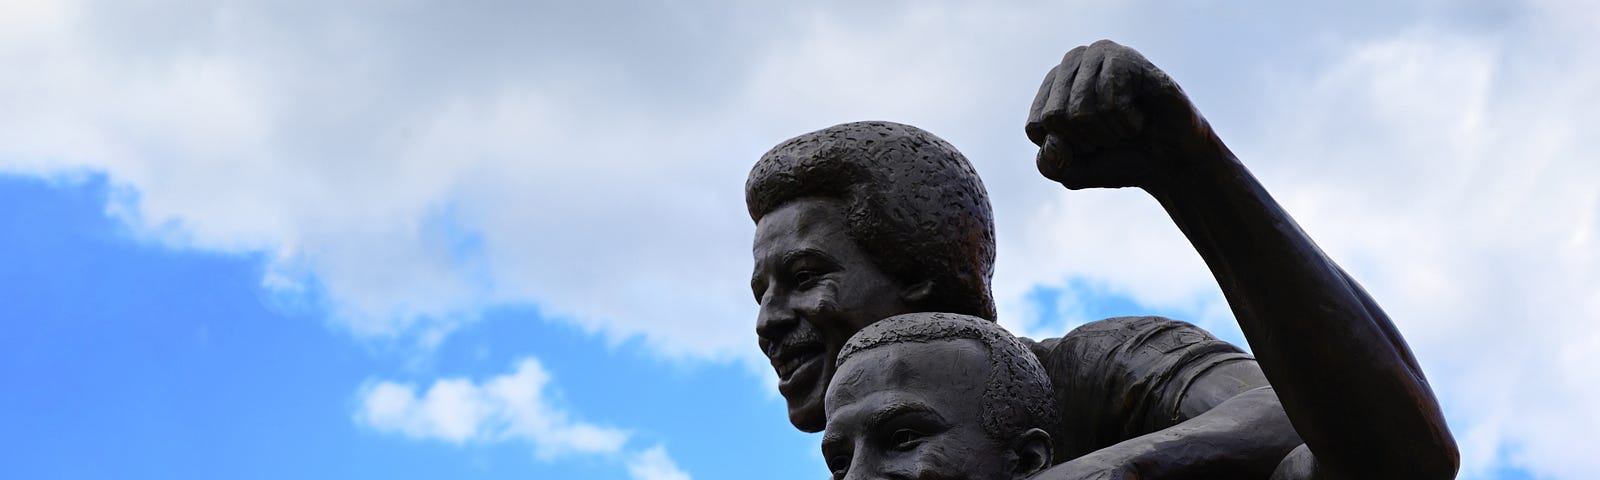 Sculpture of 3 Football players.